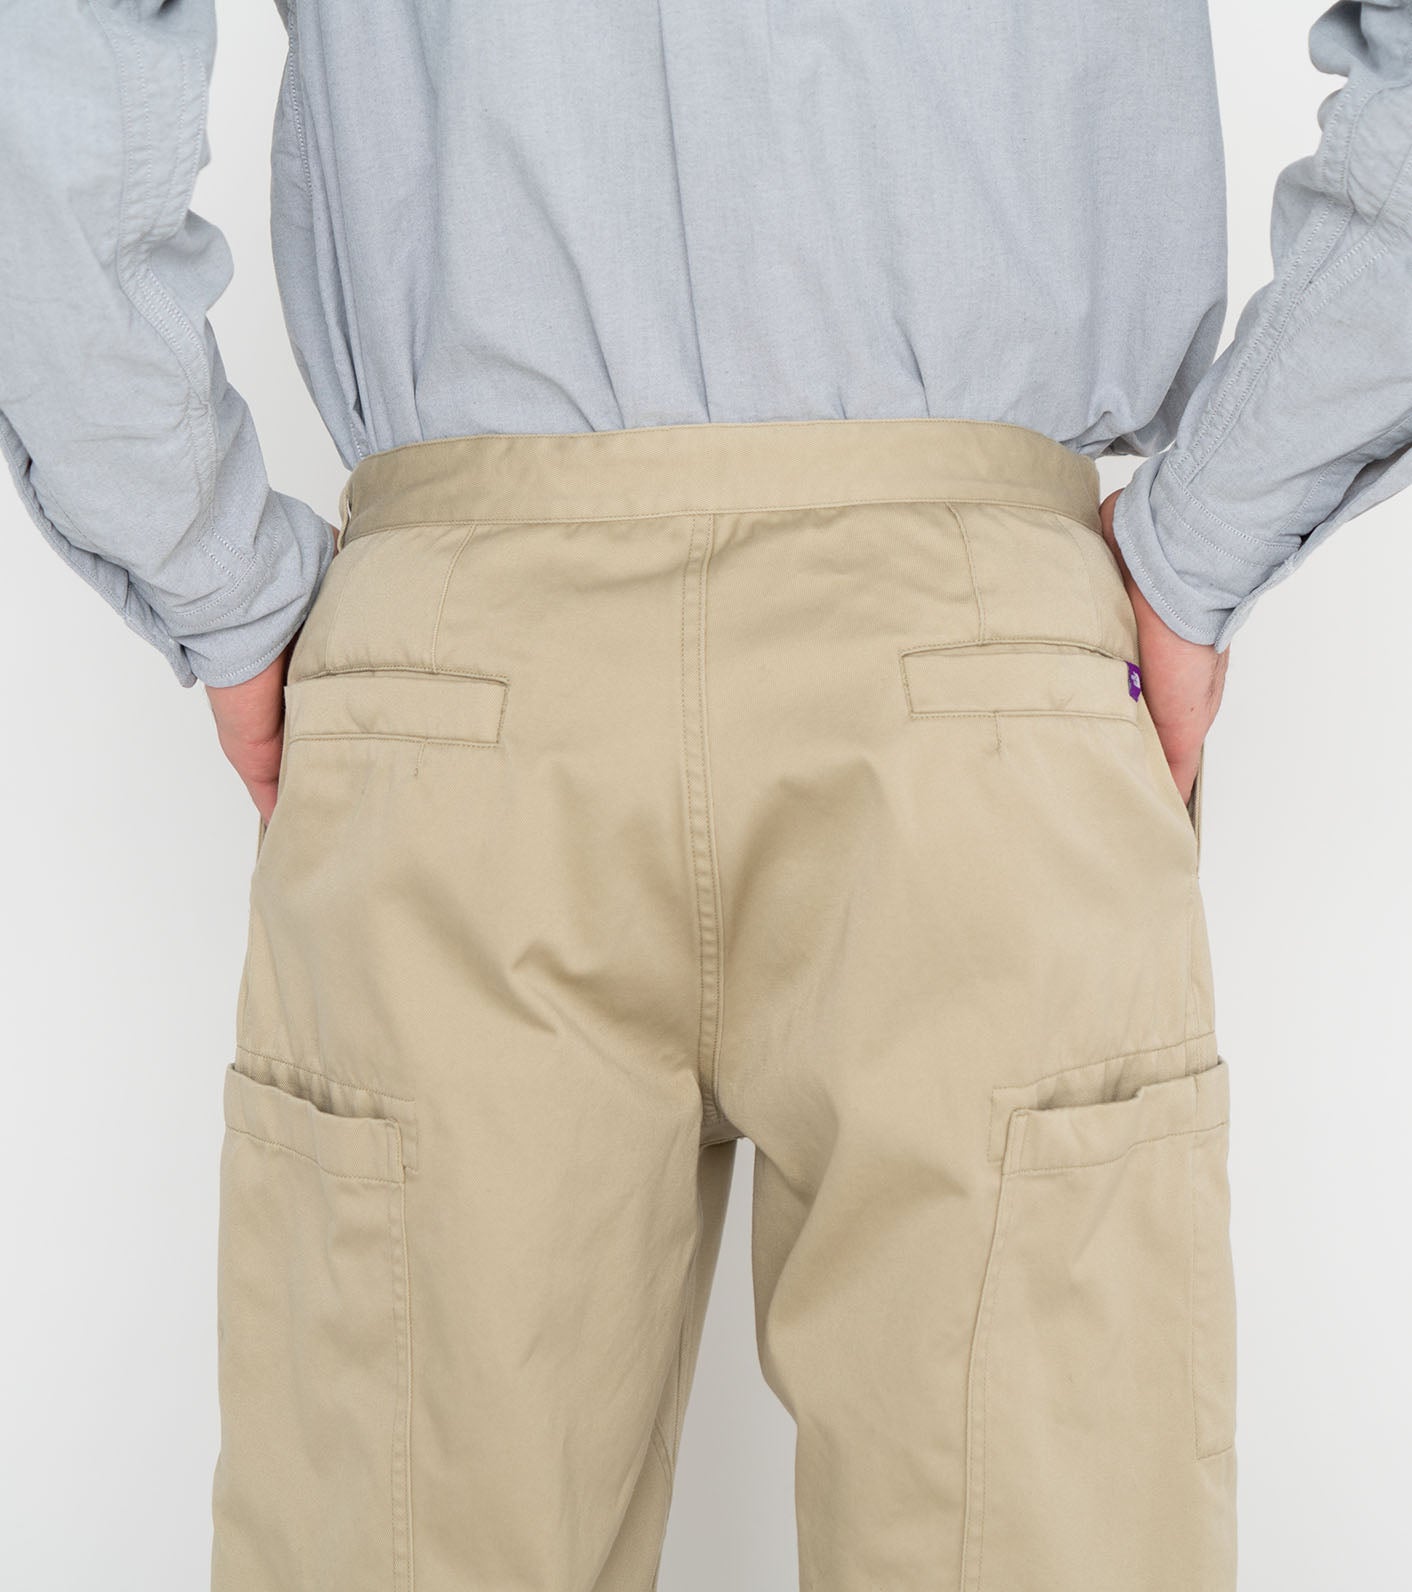 THE NORTH FACE PURPLE LABEL Chino Cargo Pocket Field Pants